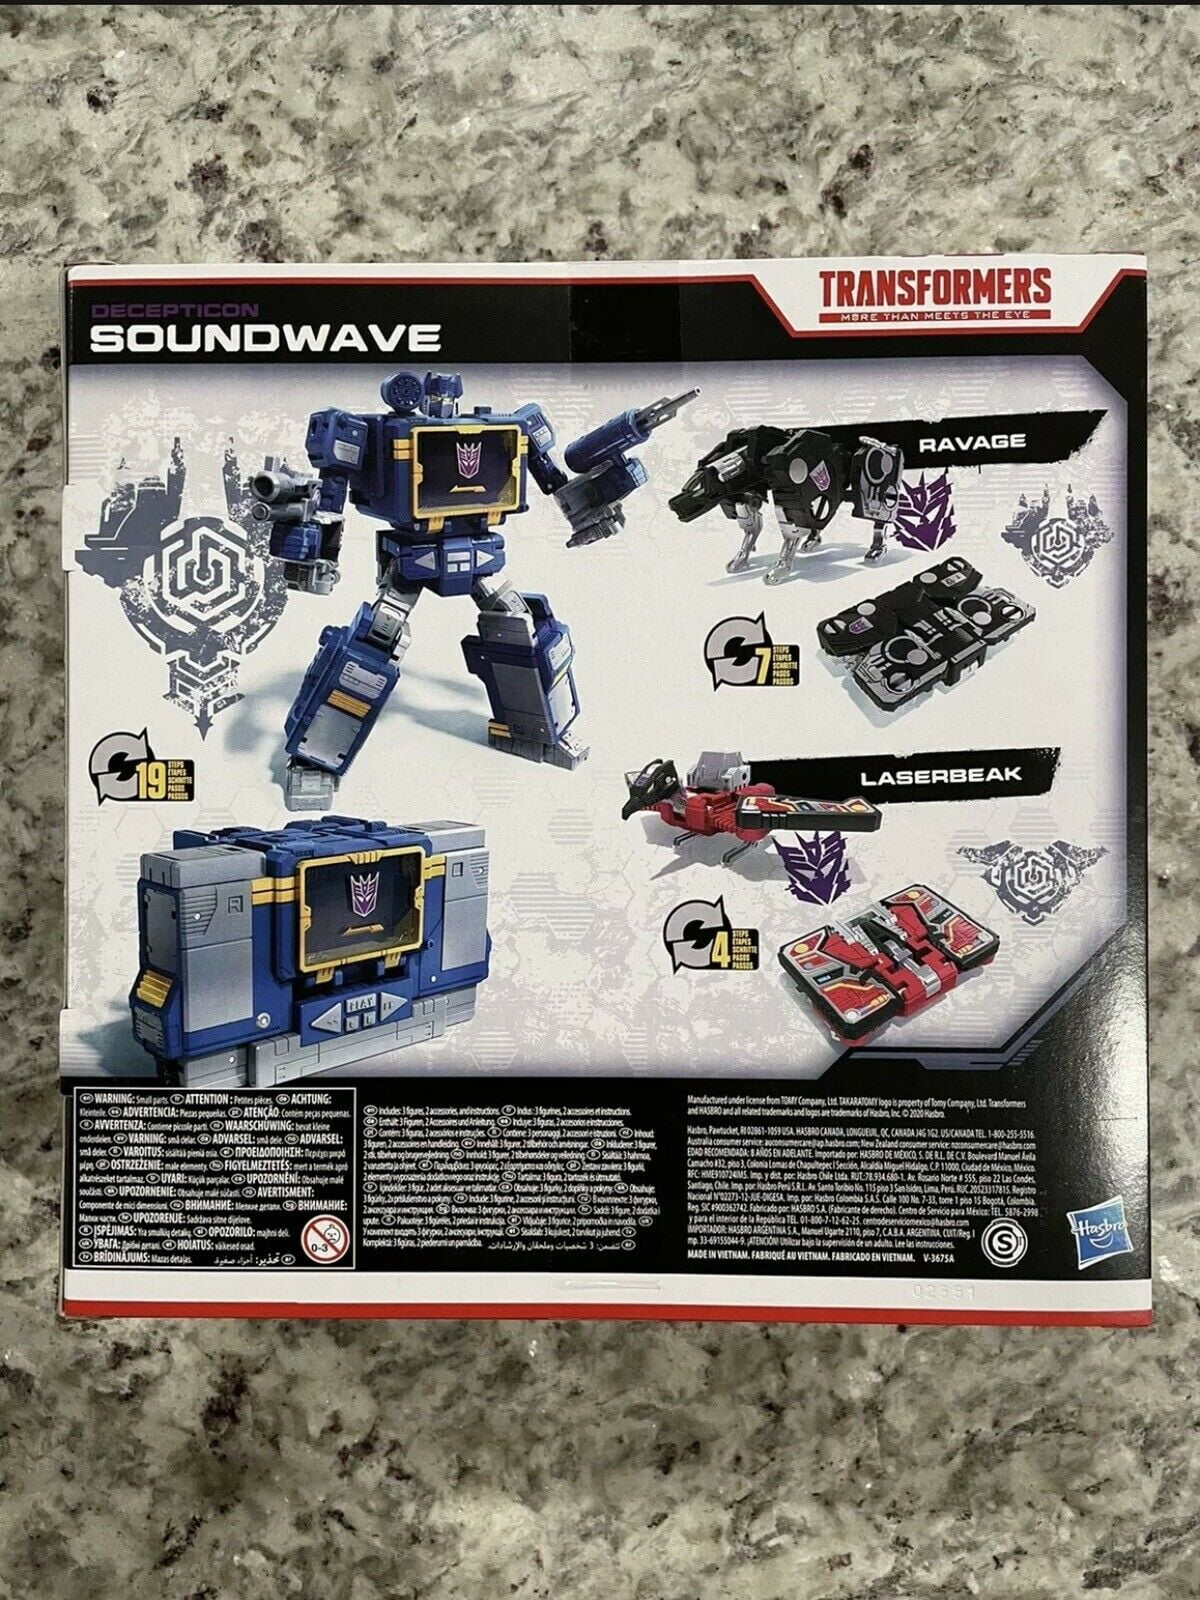 F0708 Action Figure Voyager Soundwave 7in for sale online Hasbro Transformers Netflix War for Cybertron 